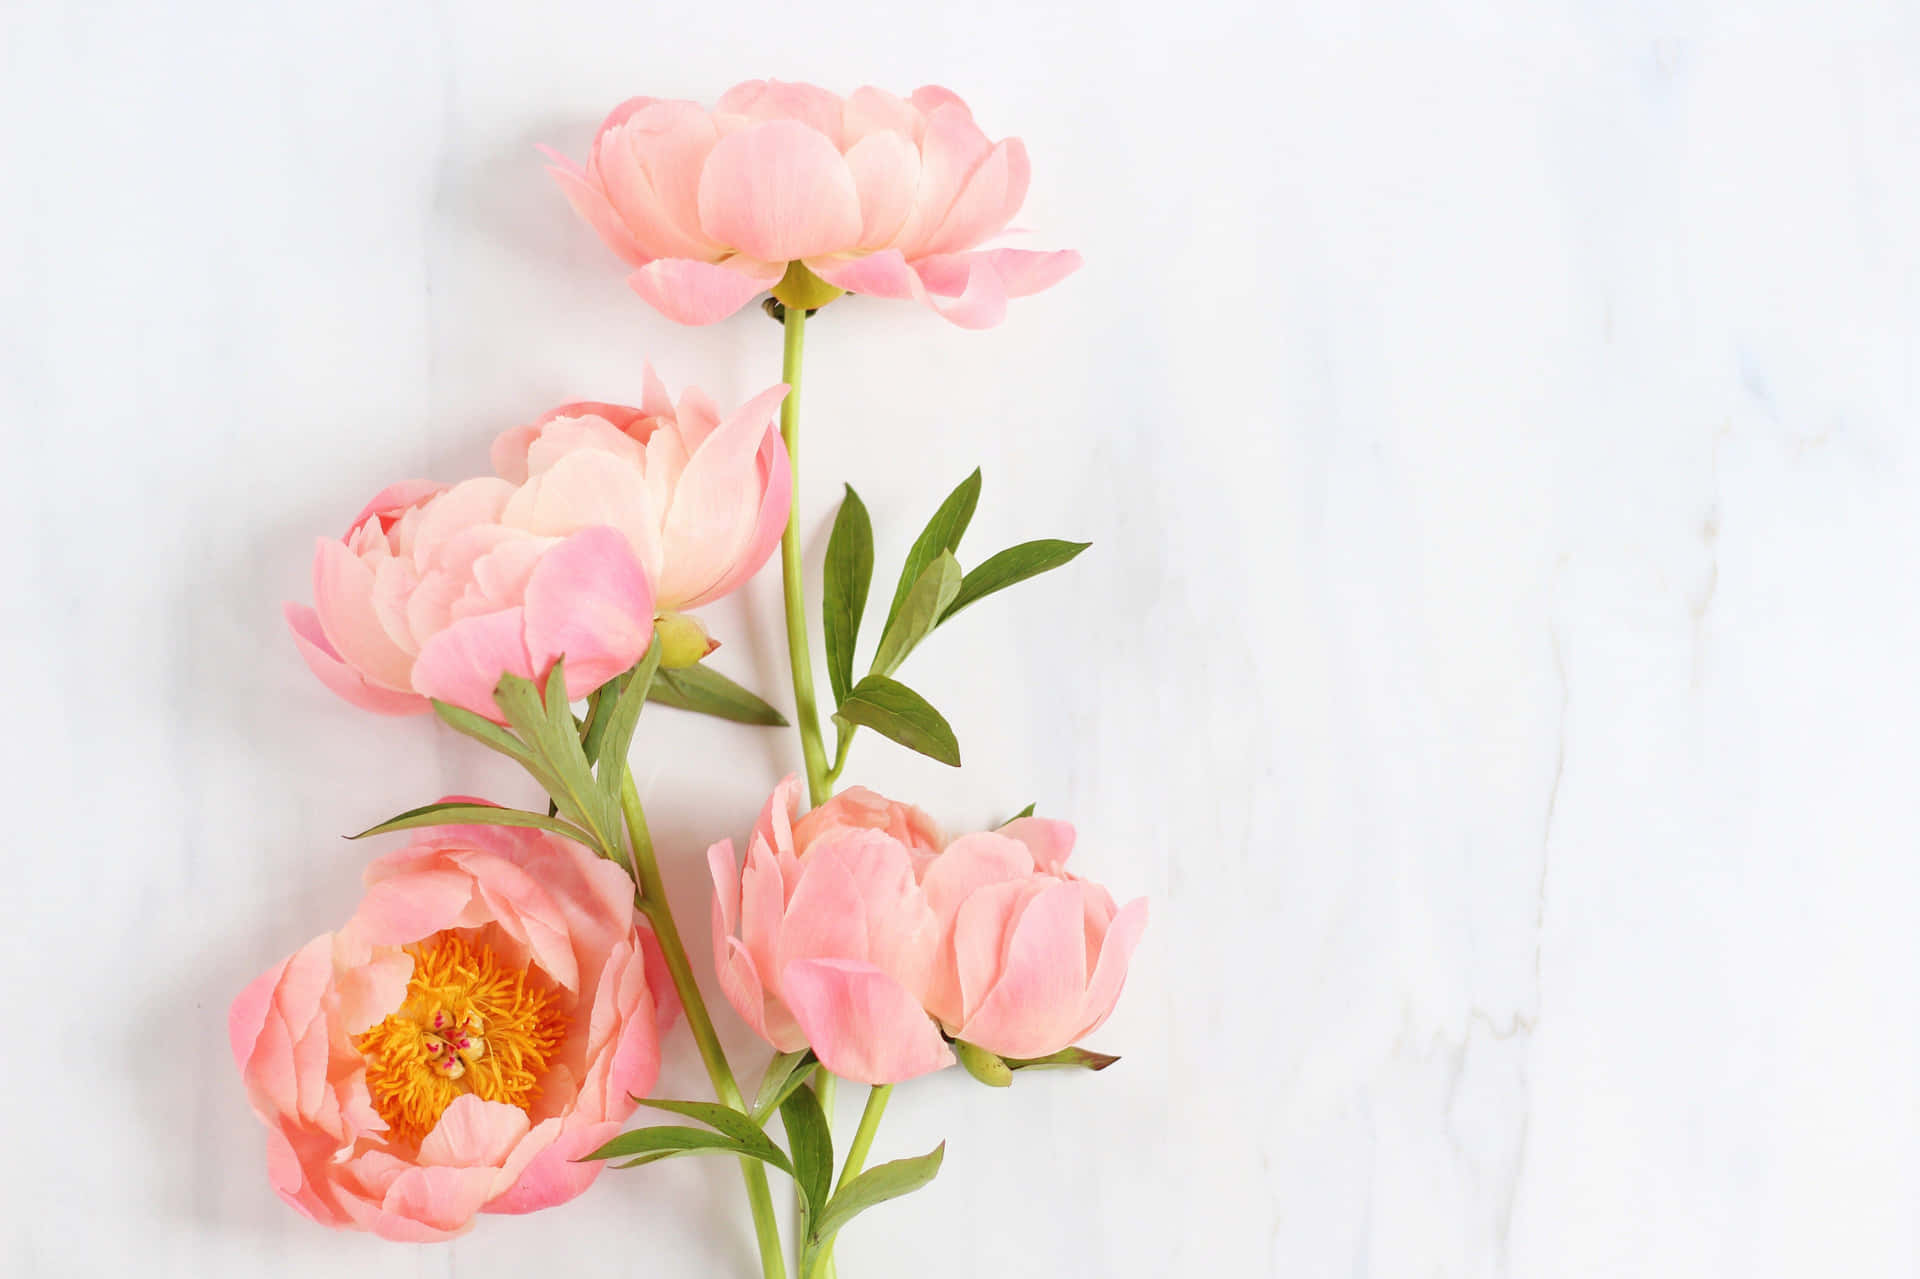 pink peonies on a marble background